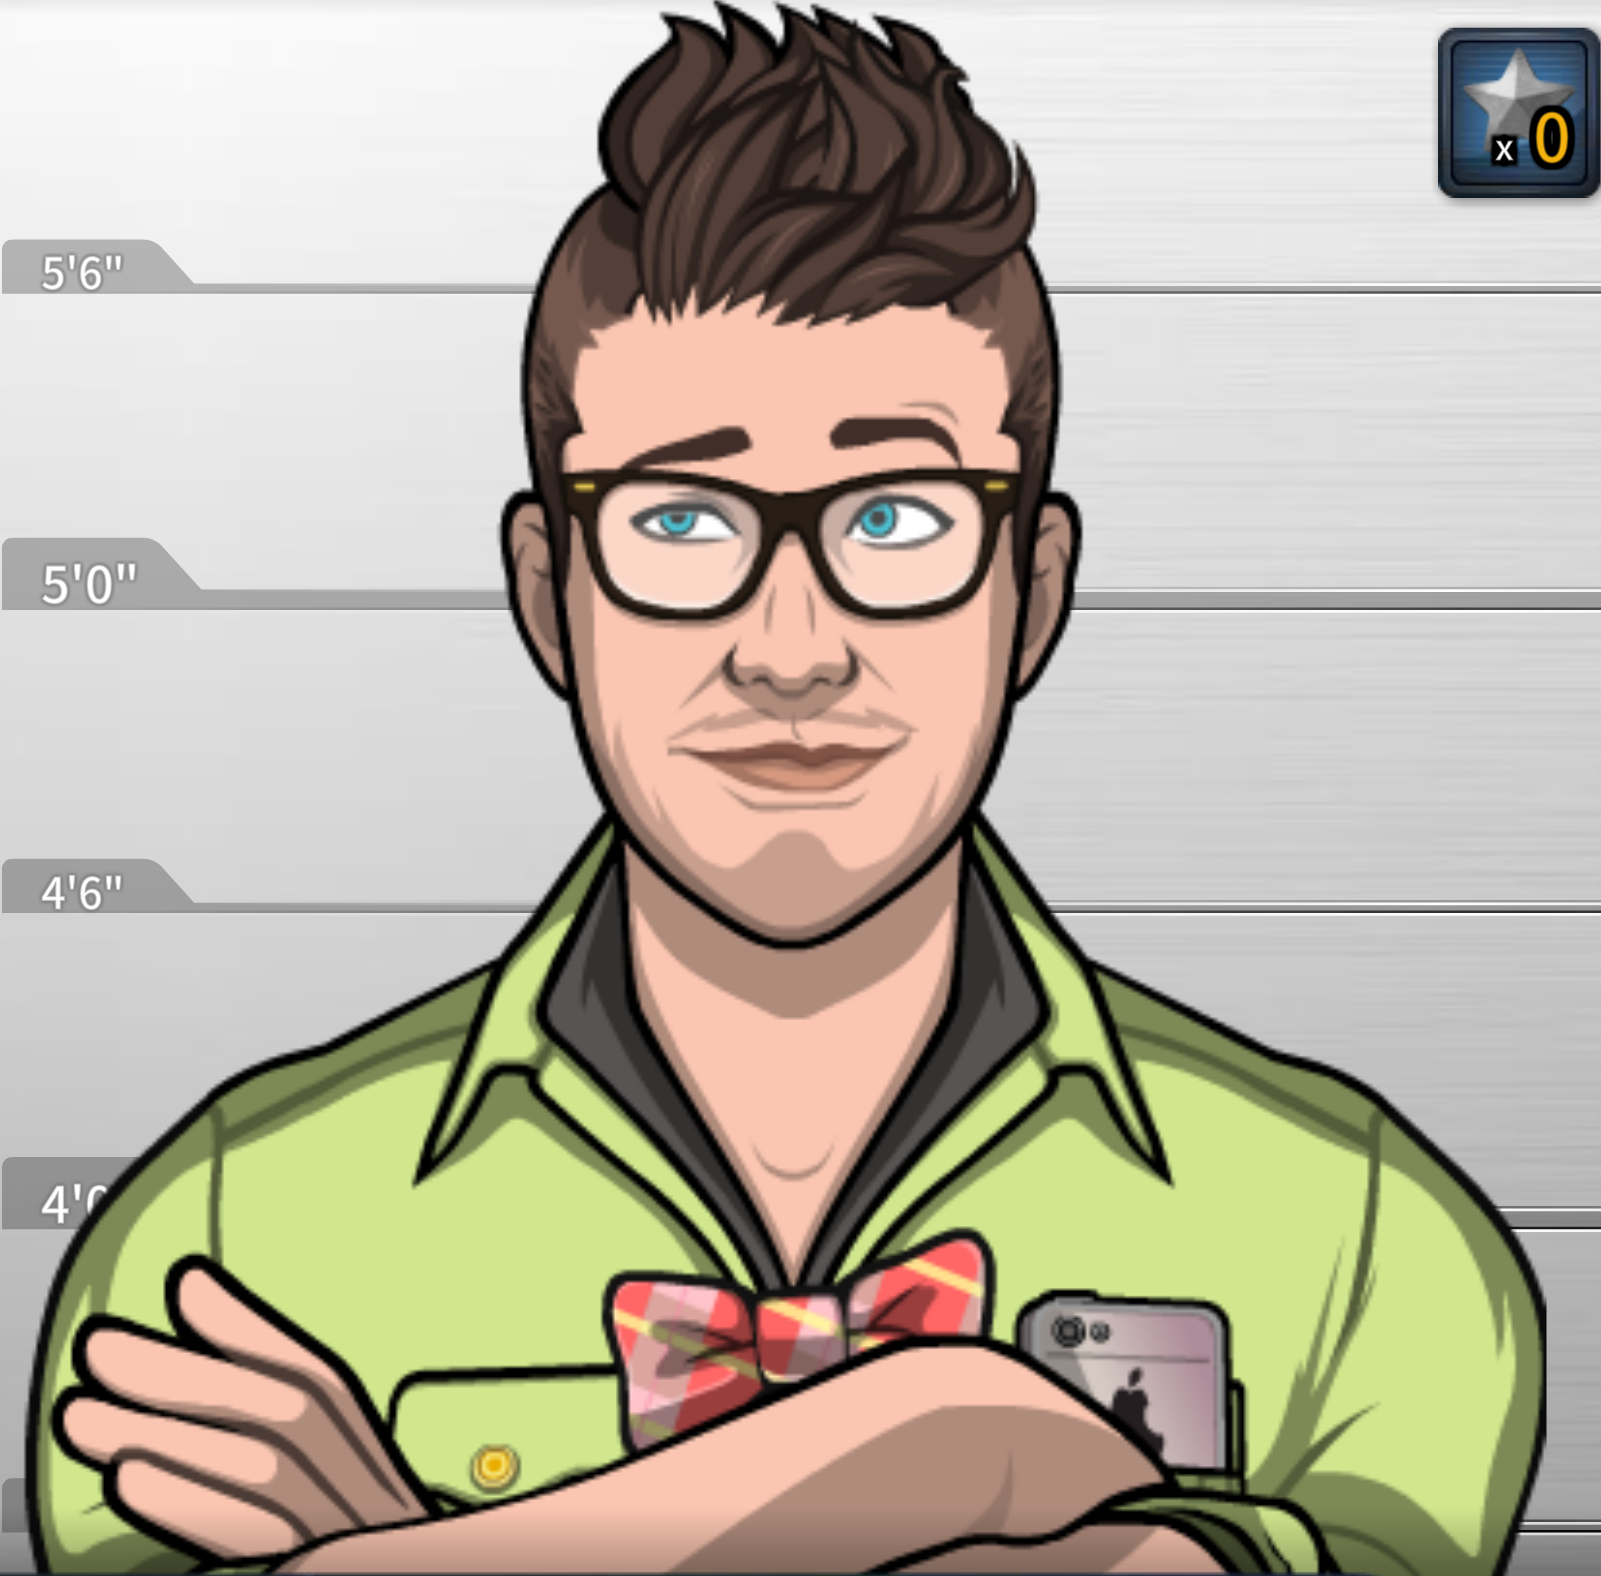 criminal case pacific bay characters